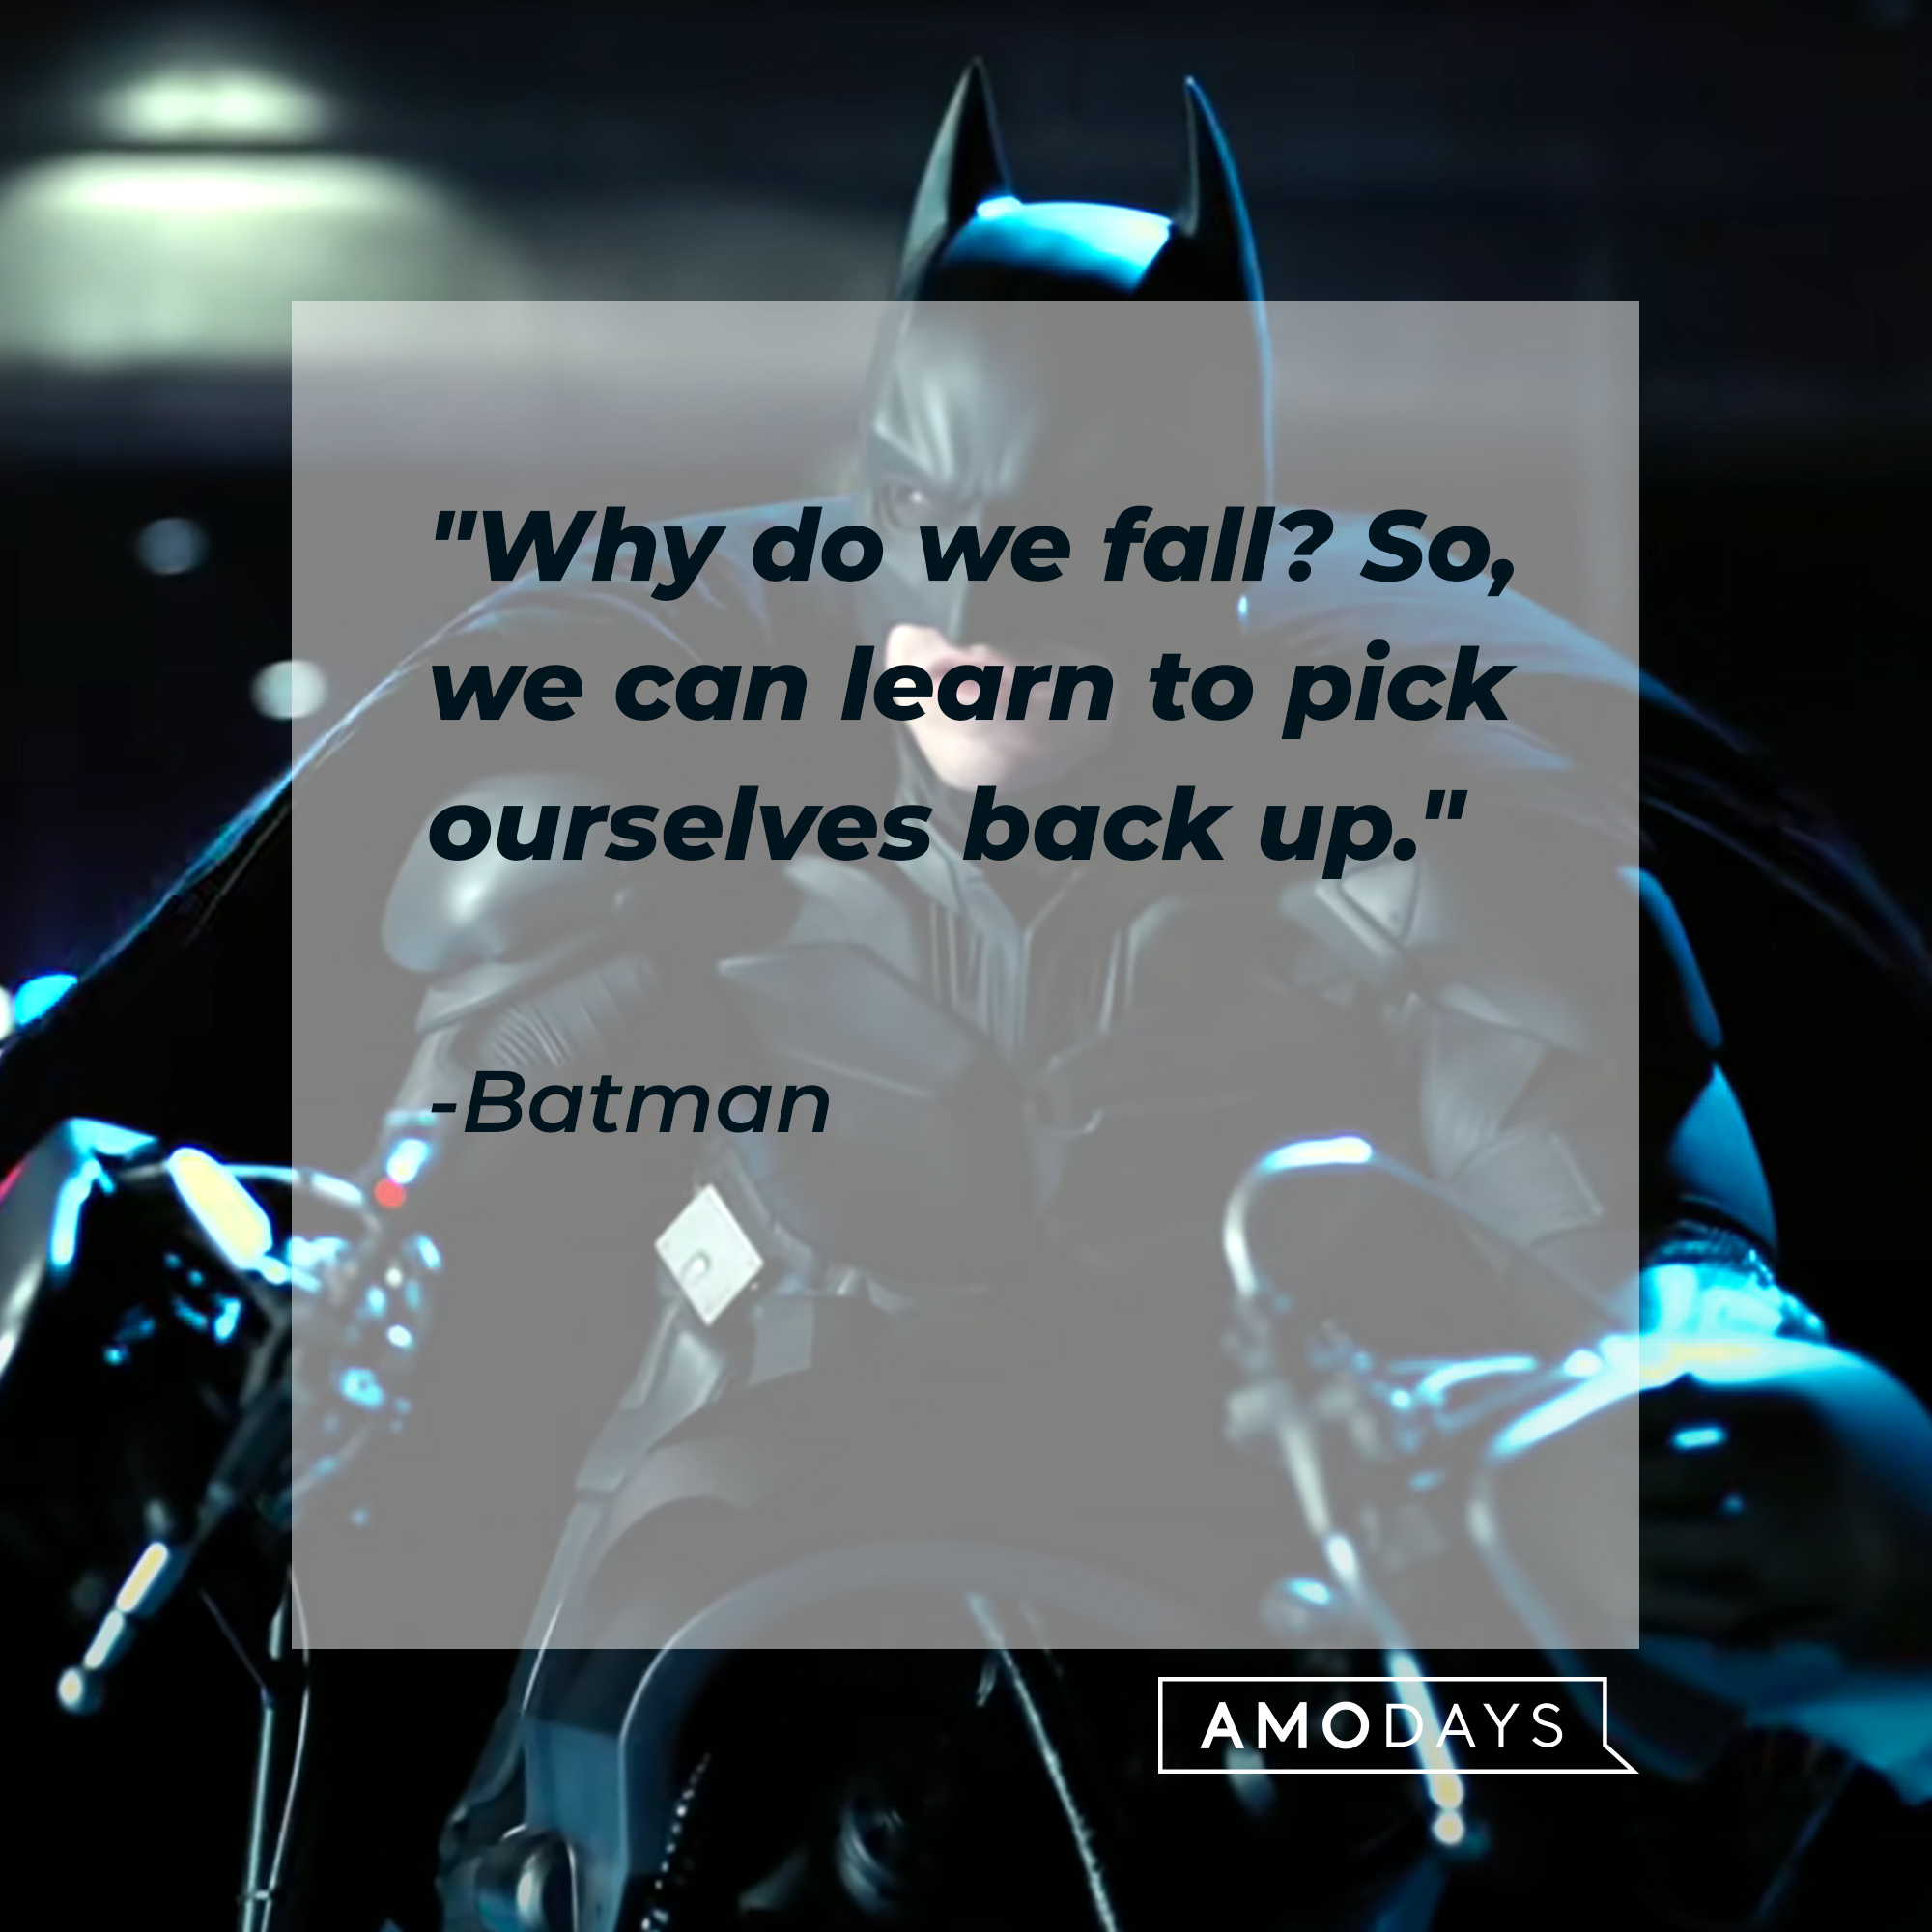 Batman's quote: Why do we fall? So, we can learn to pick ourselves back up." | Source: facebook.com/dc